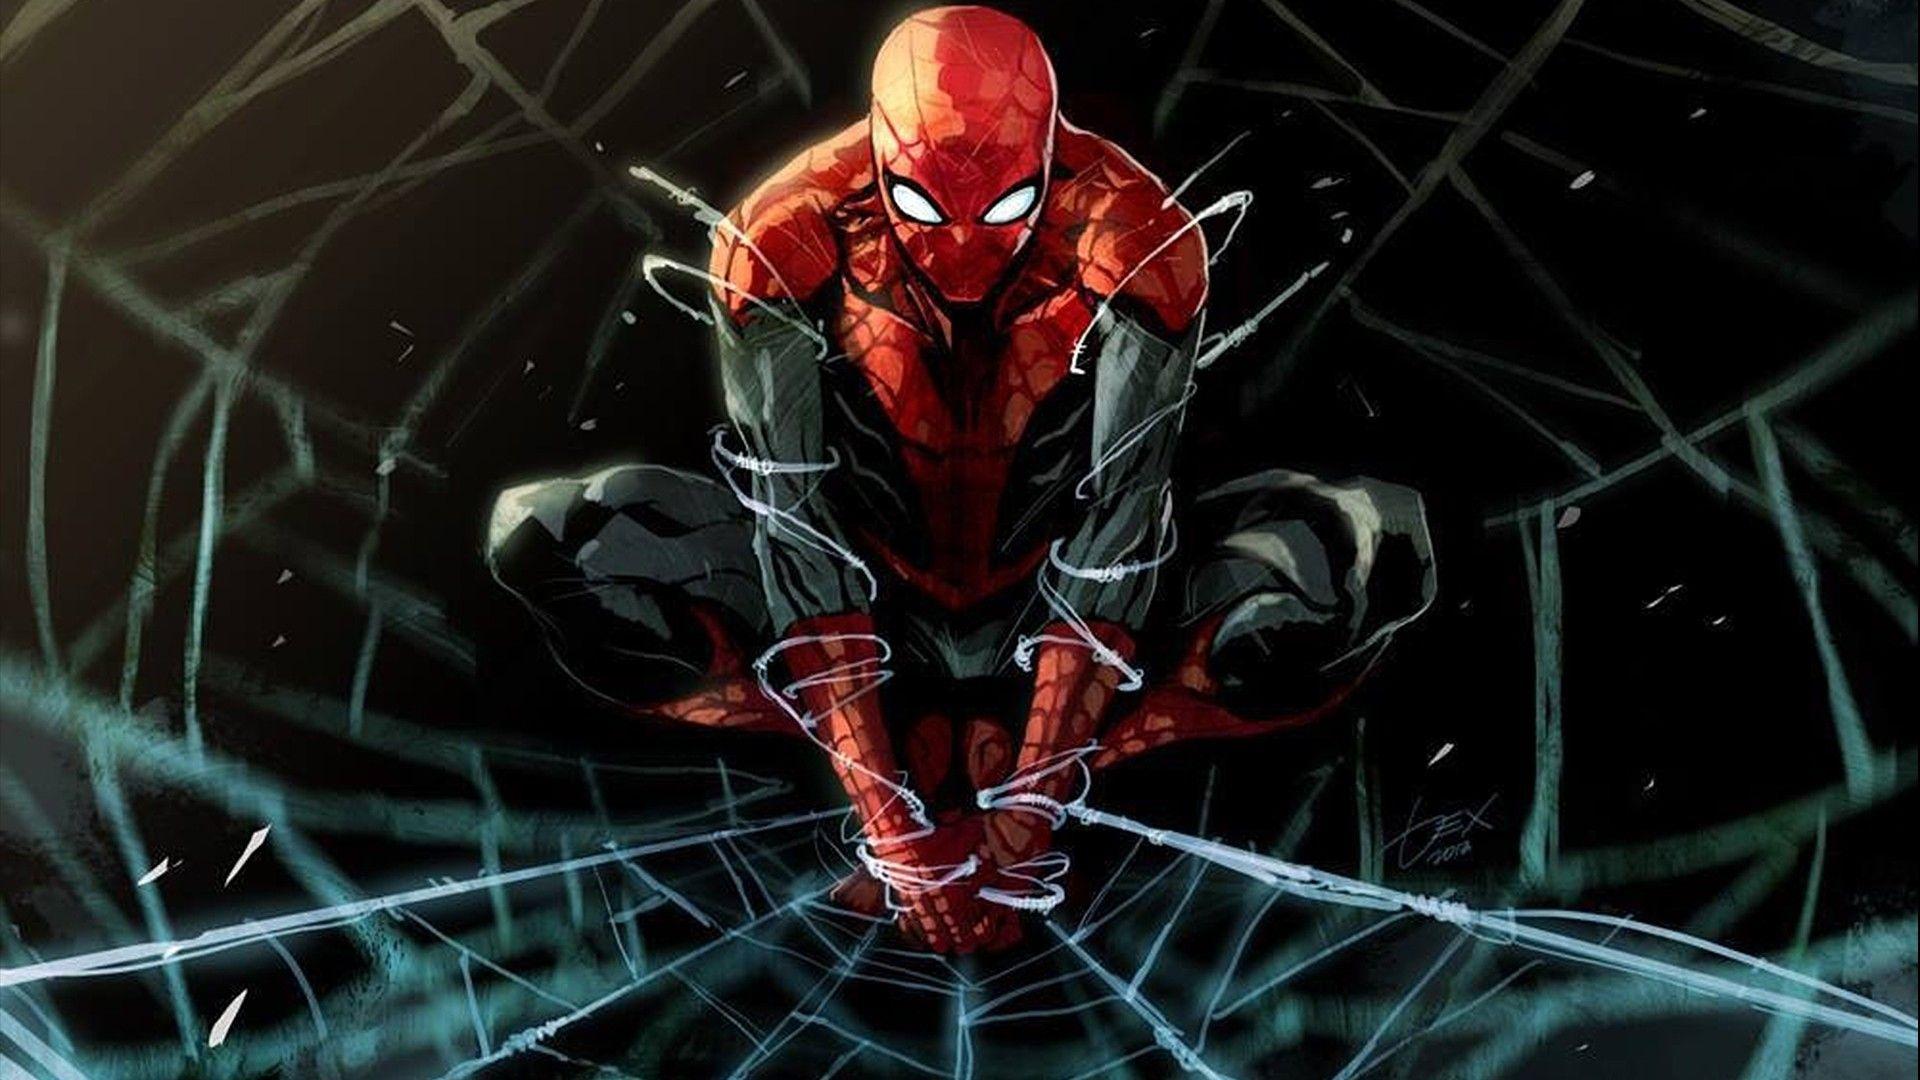 Cool Spider-Man Wallpapers - Wallpaper Cave